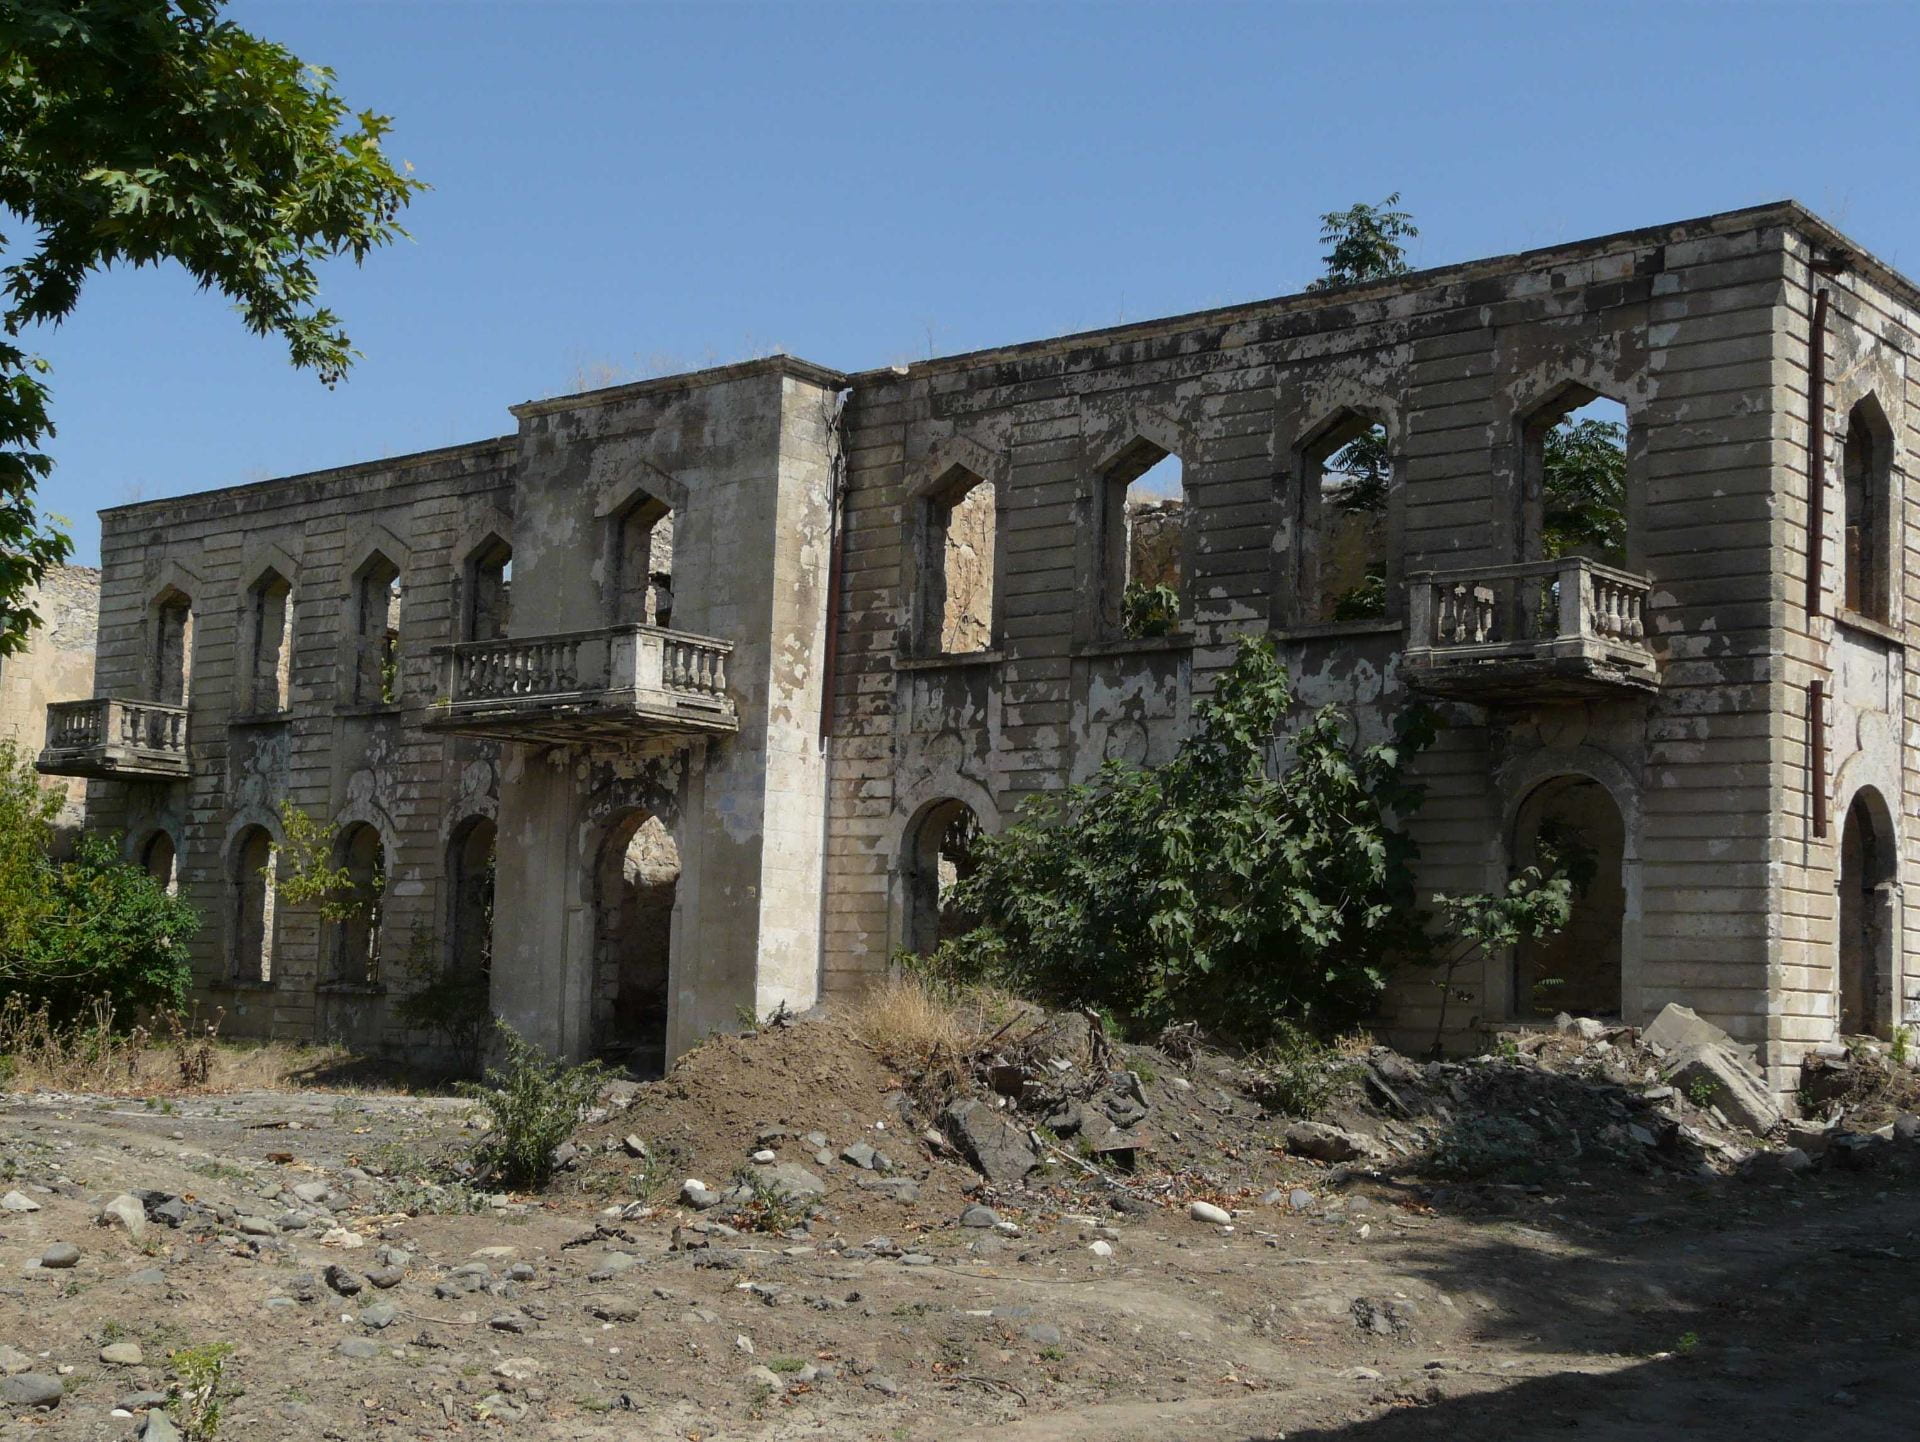 A destroyed city in Nagorno-Karabakh from the first Armenia and Azerbaijani conflict.